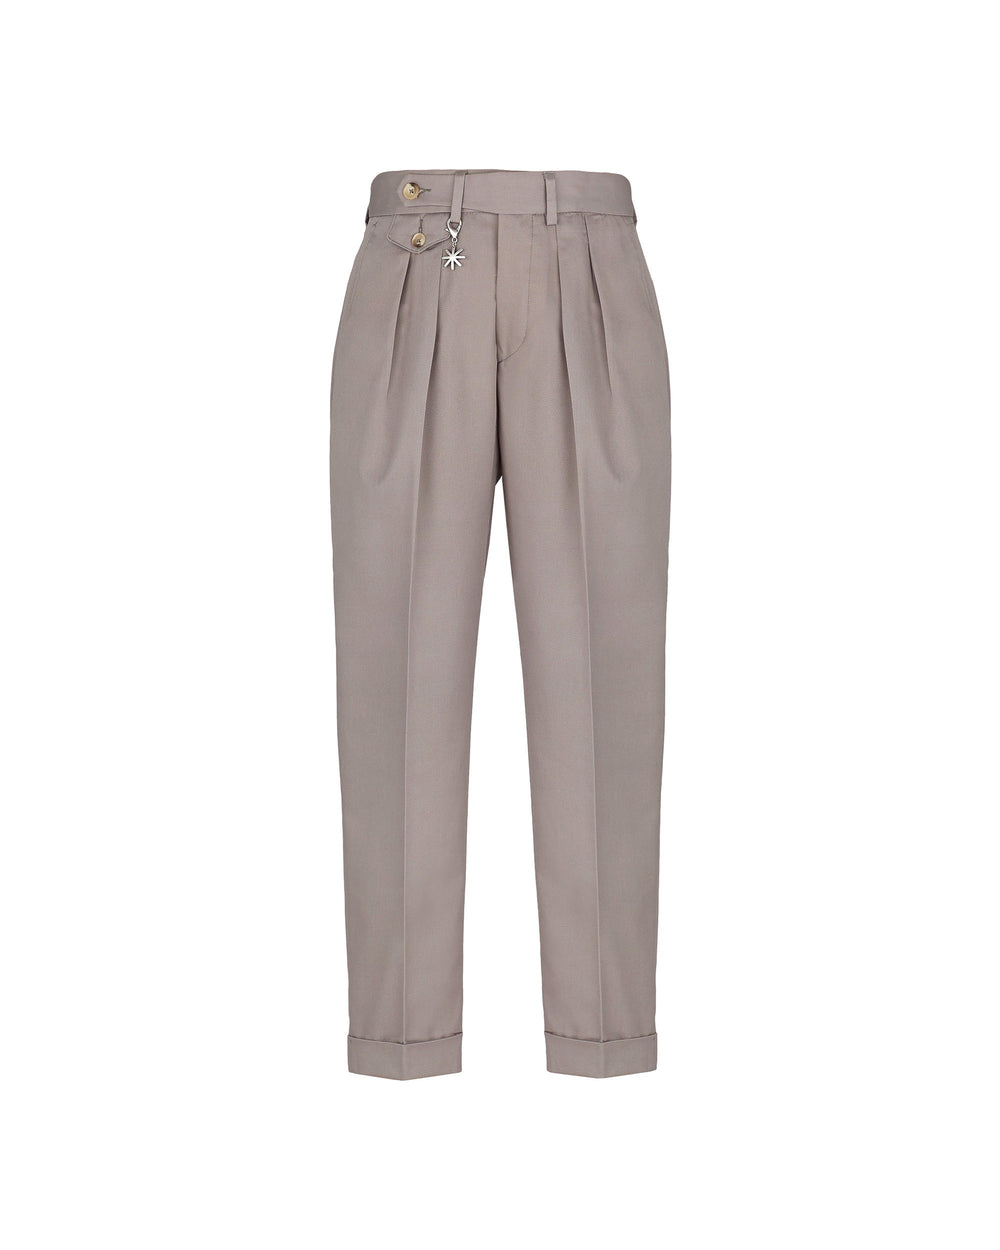 gray double pleat baggy twill cotton blend trousers